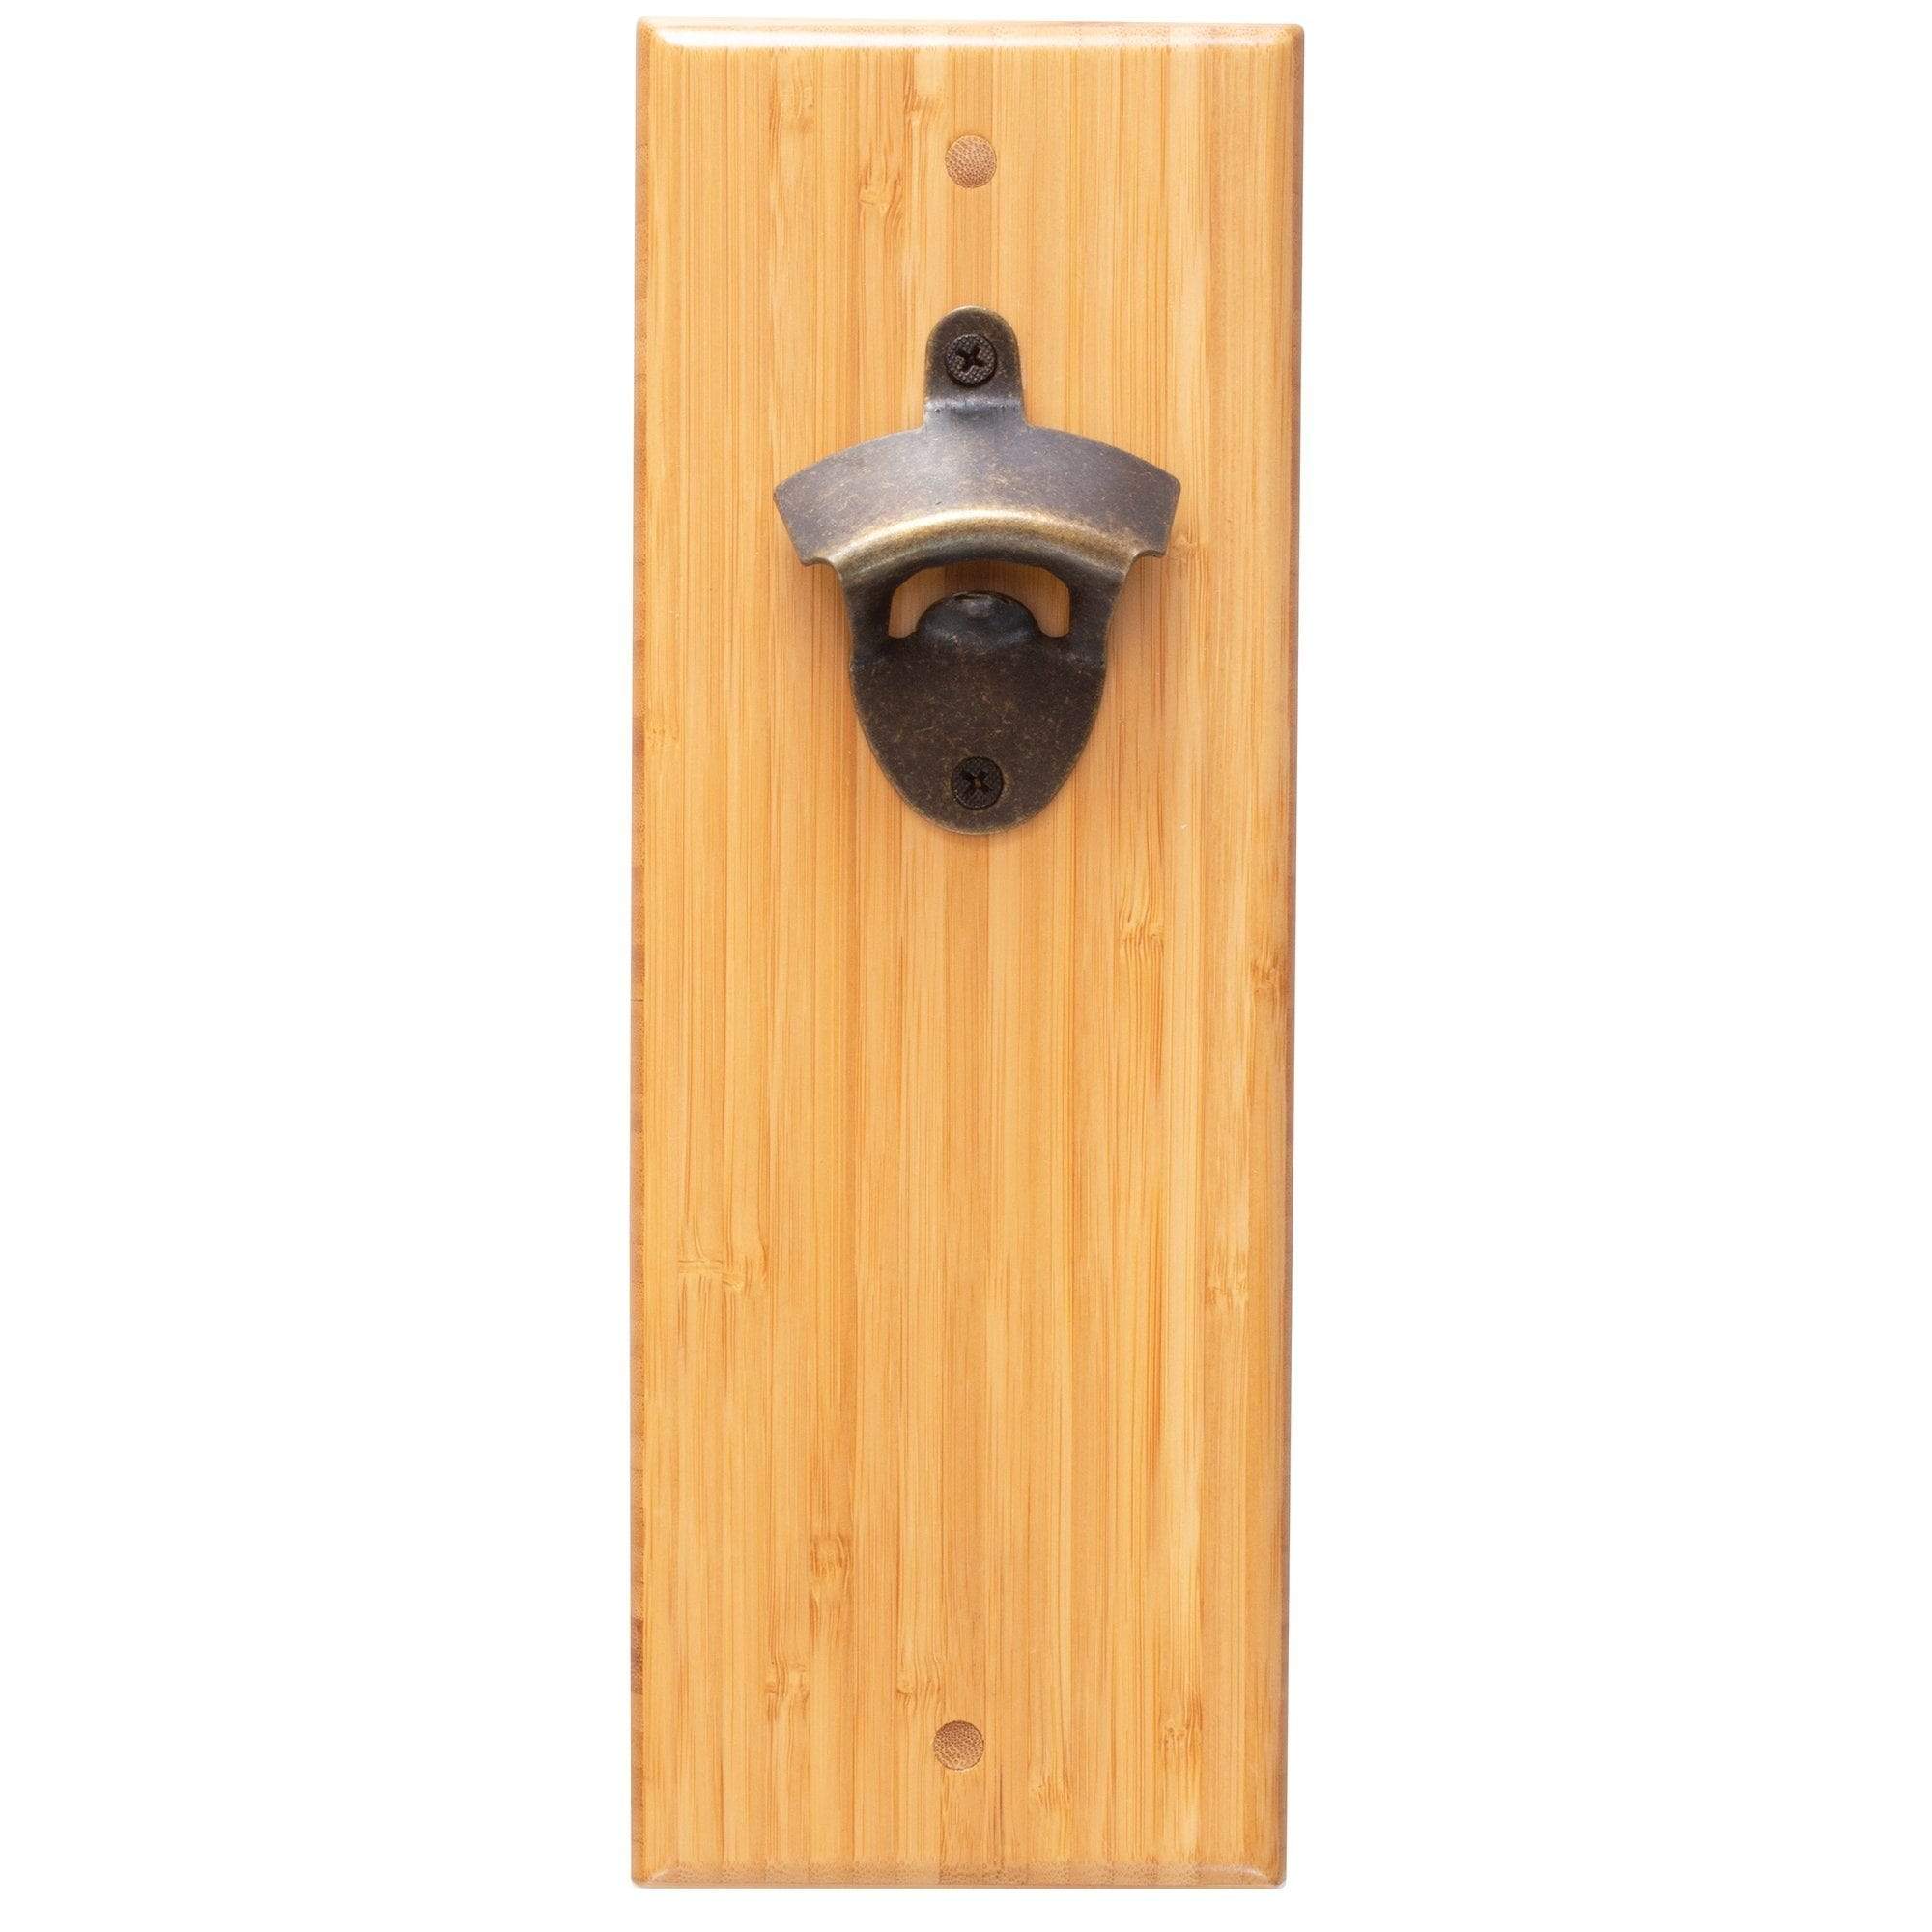 https://totallybamboo.com/cdn/shop/products/wall-mounted-bottle-opener-with-magnetic-bottle-cap-catcher-totally-bamboo-602221.jpg?v=1627823525